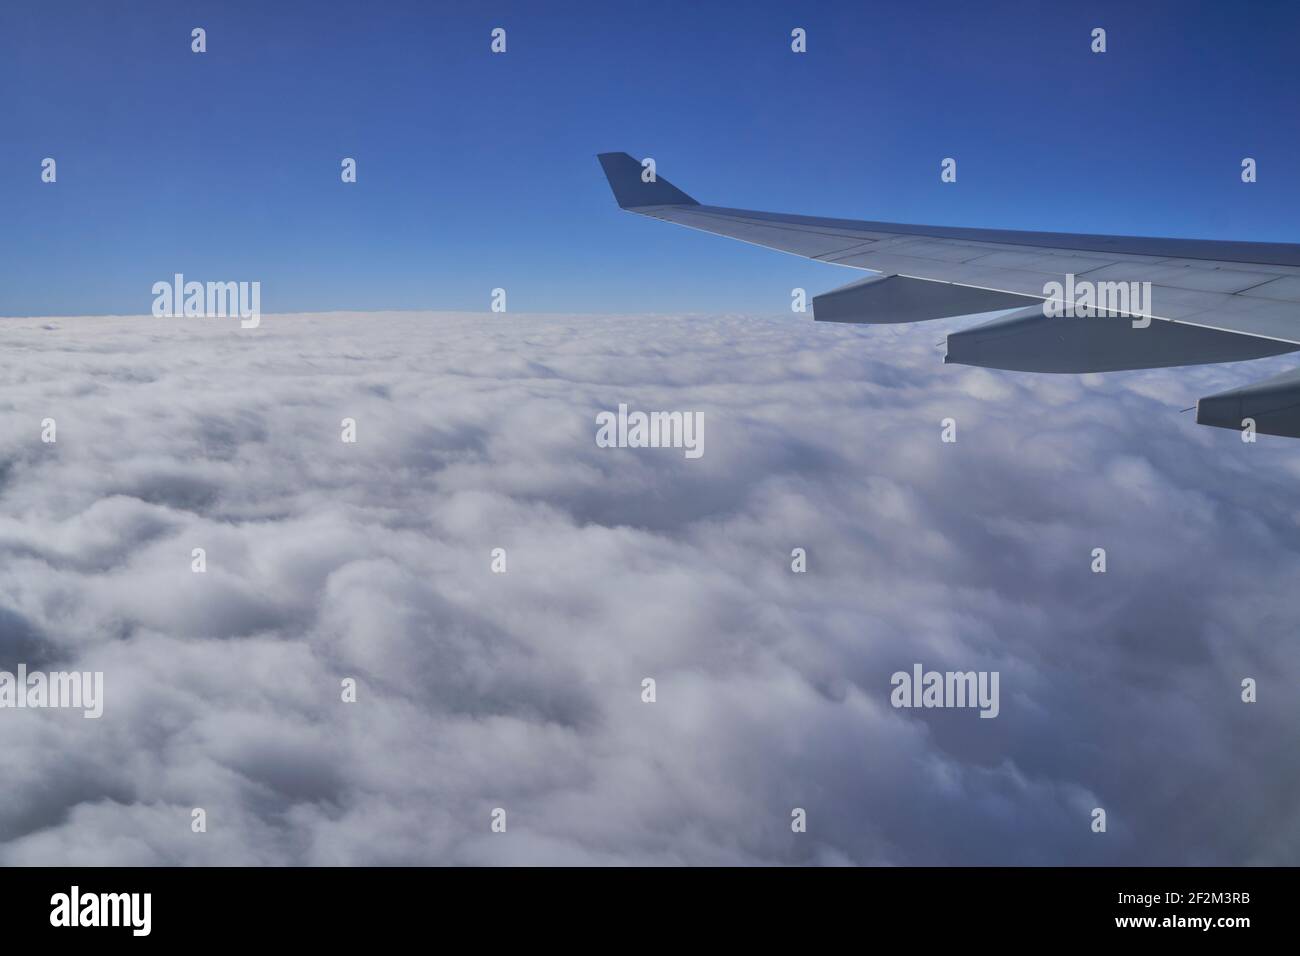 Wing of Airplane Jet above the clouds with blue sky and cloud cover, Atlantic Ocean, Stock Photo